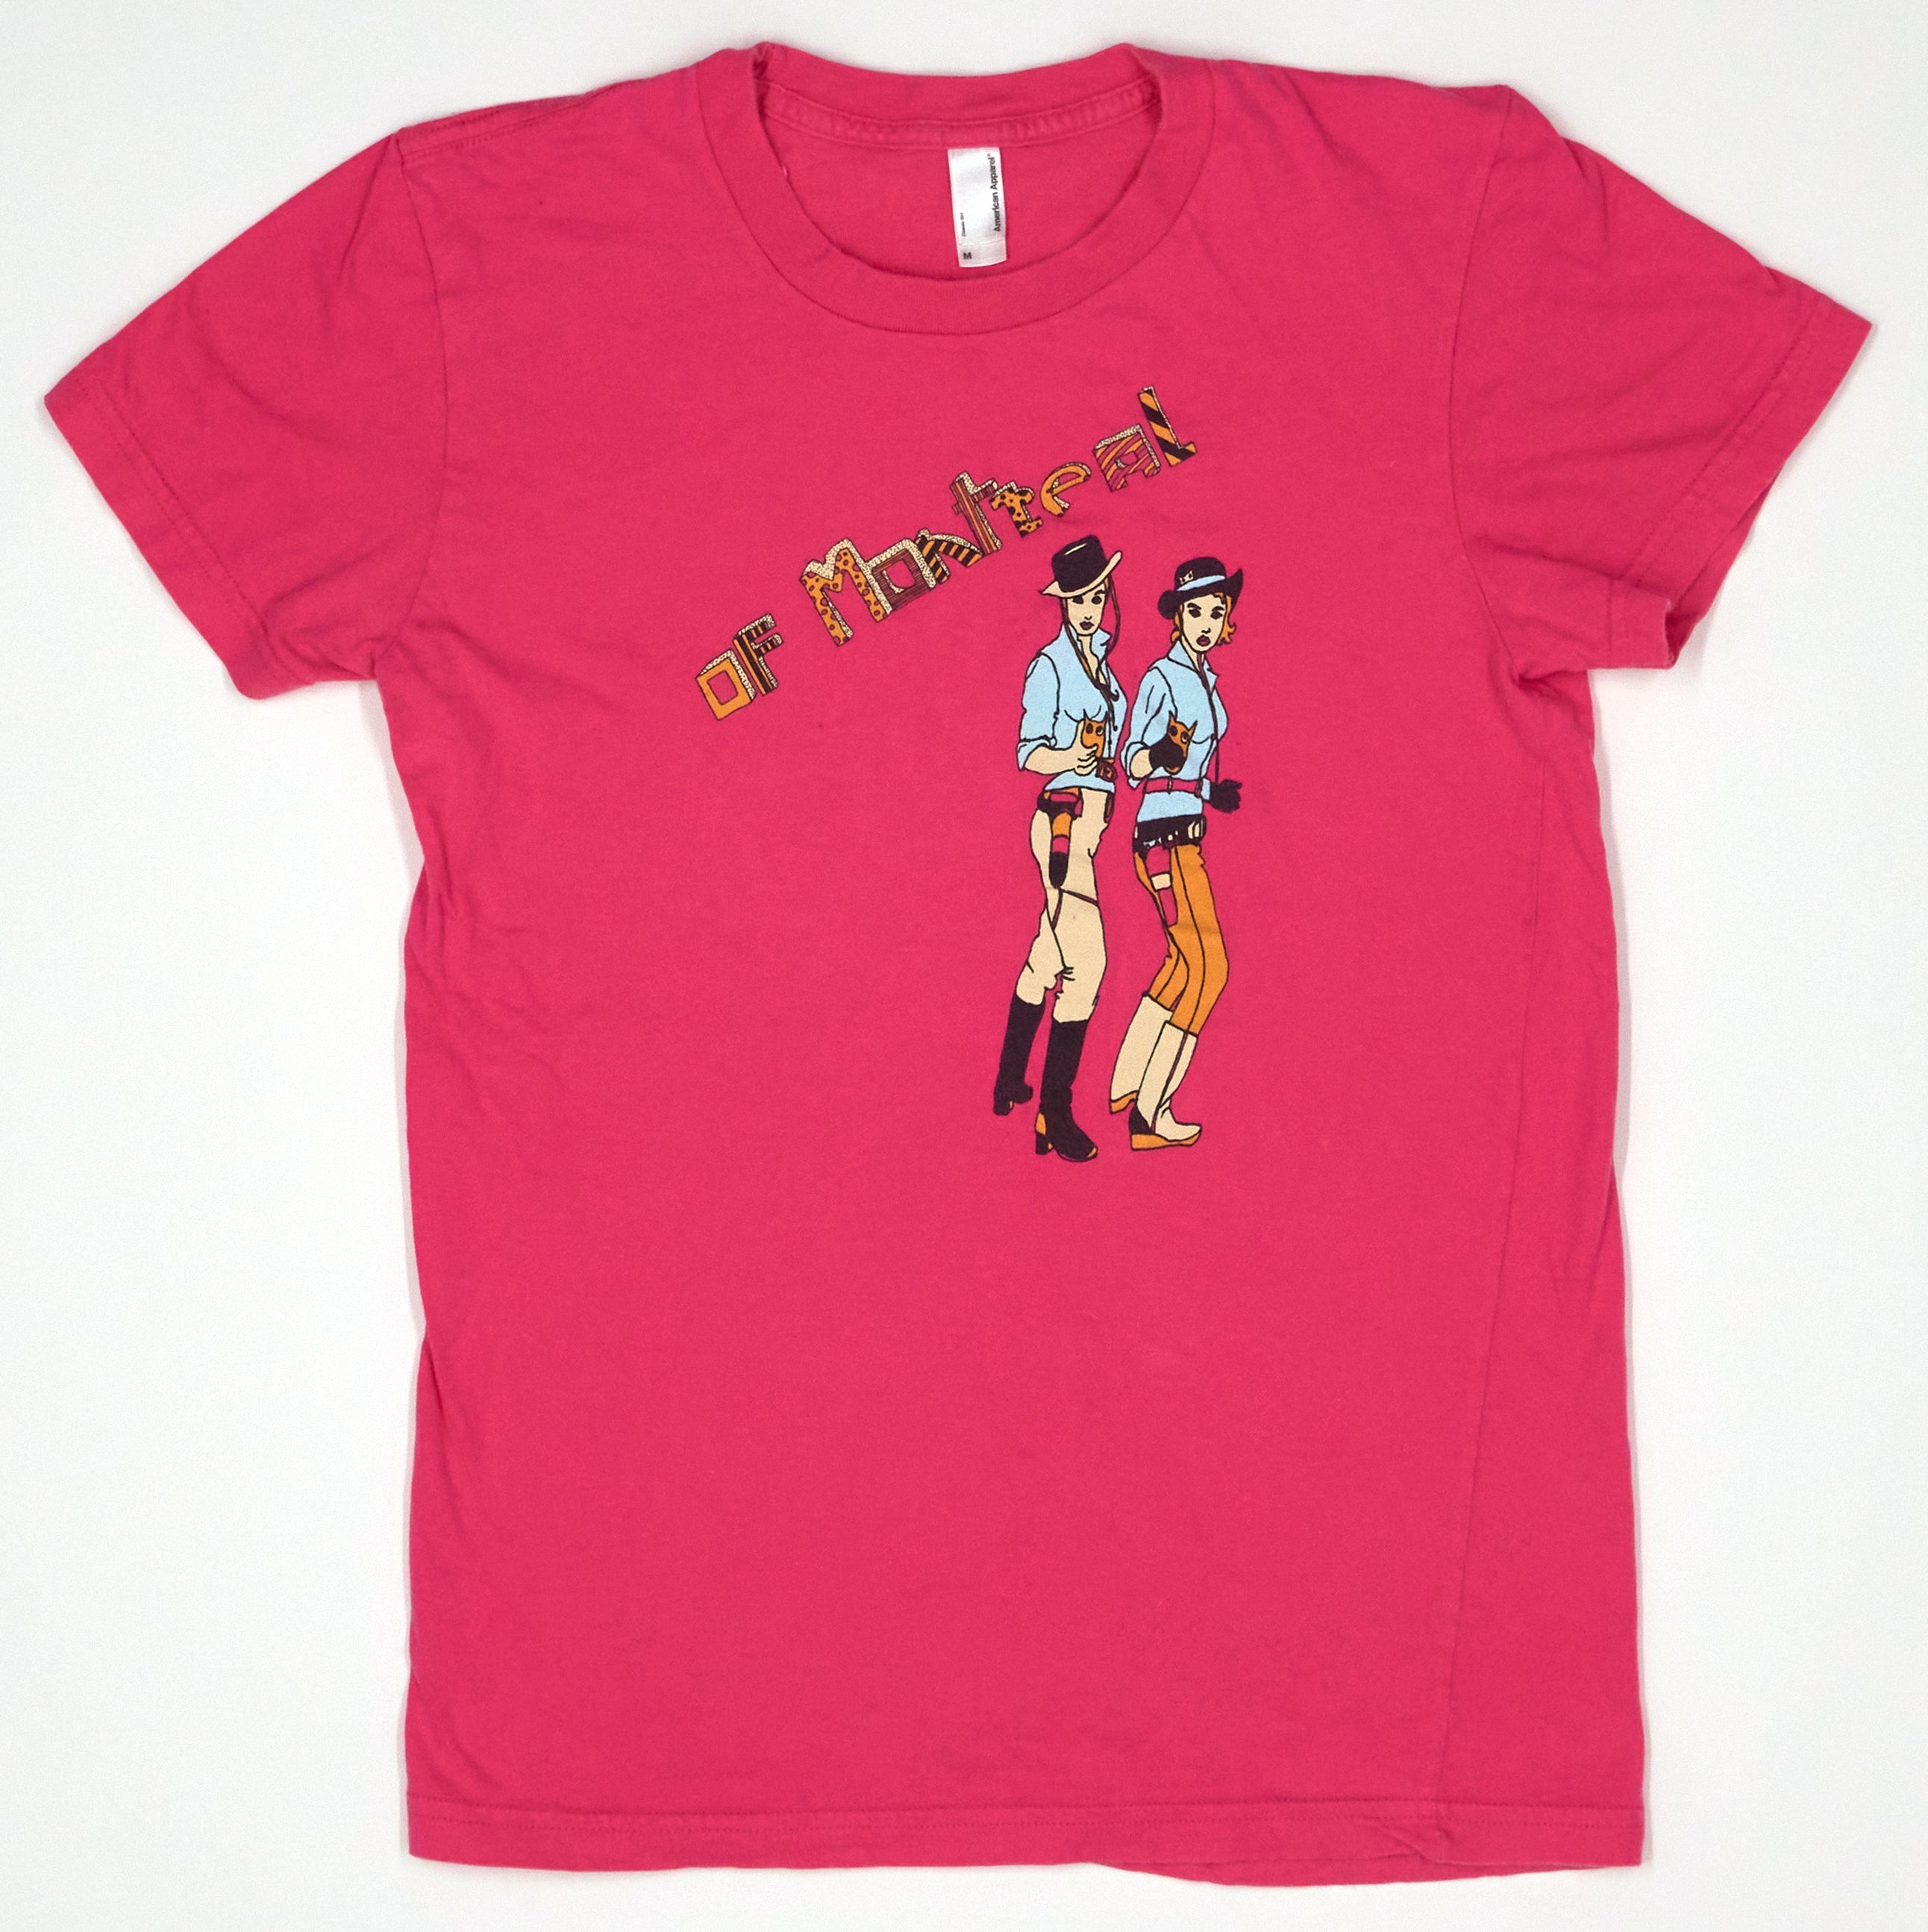 Of Montreal – Two Cowgirls Tour Shirt Size Women's Medium